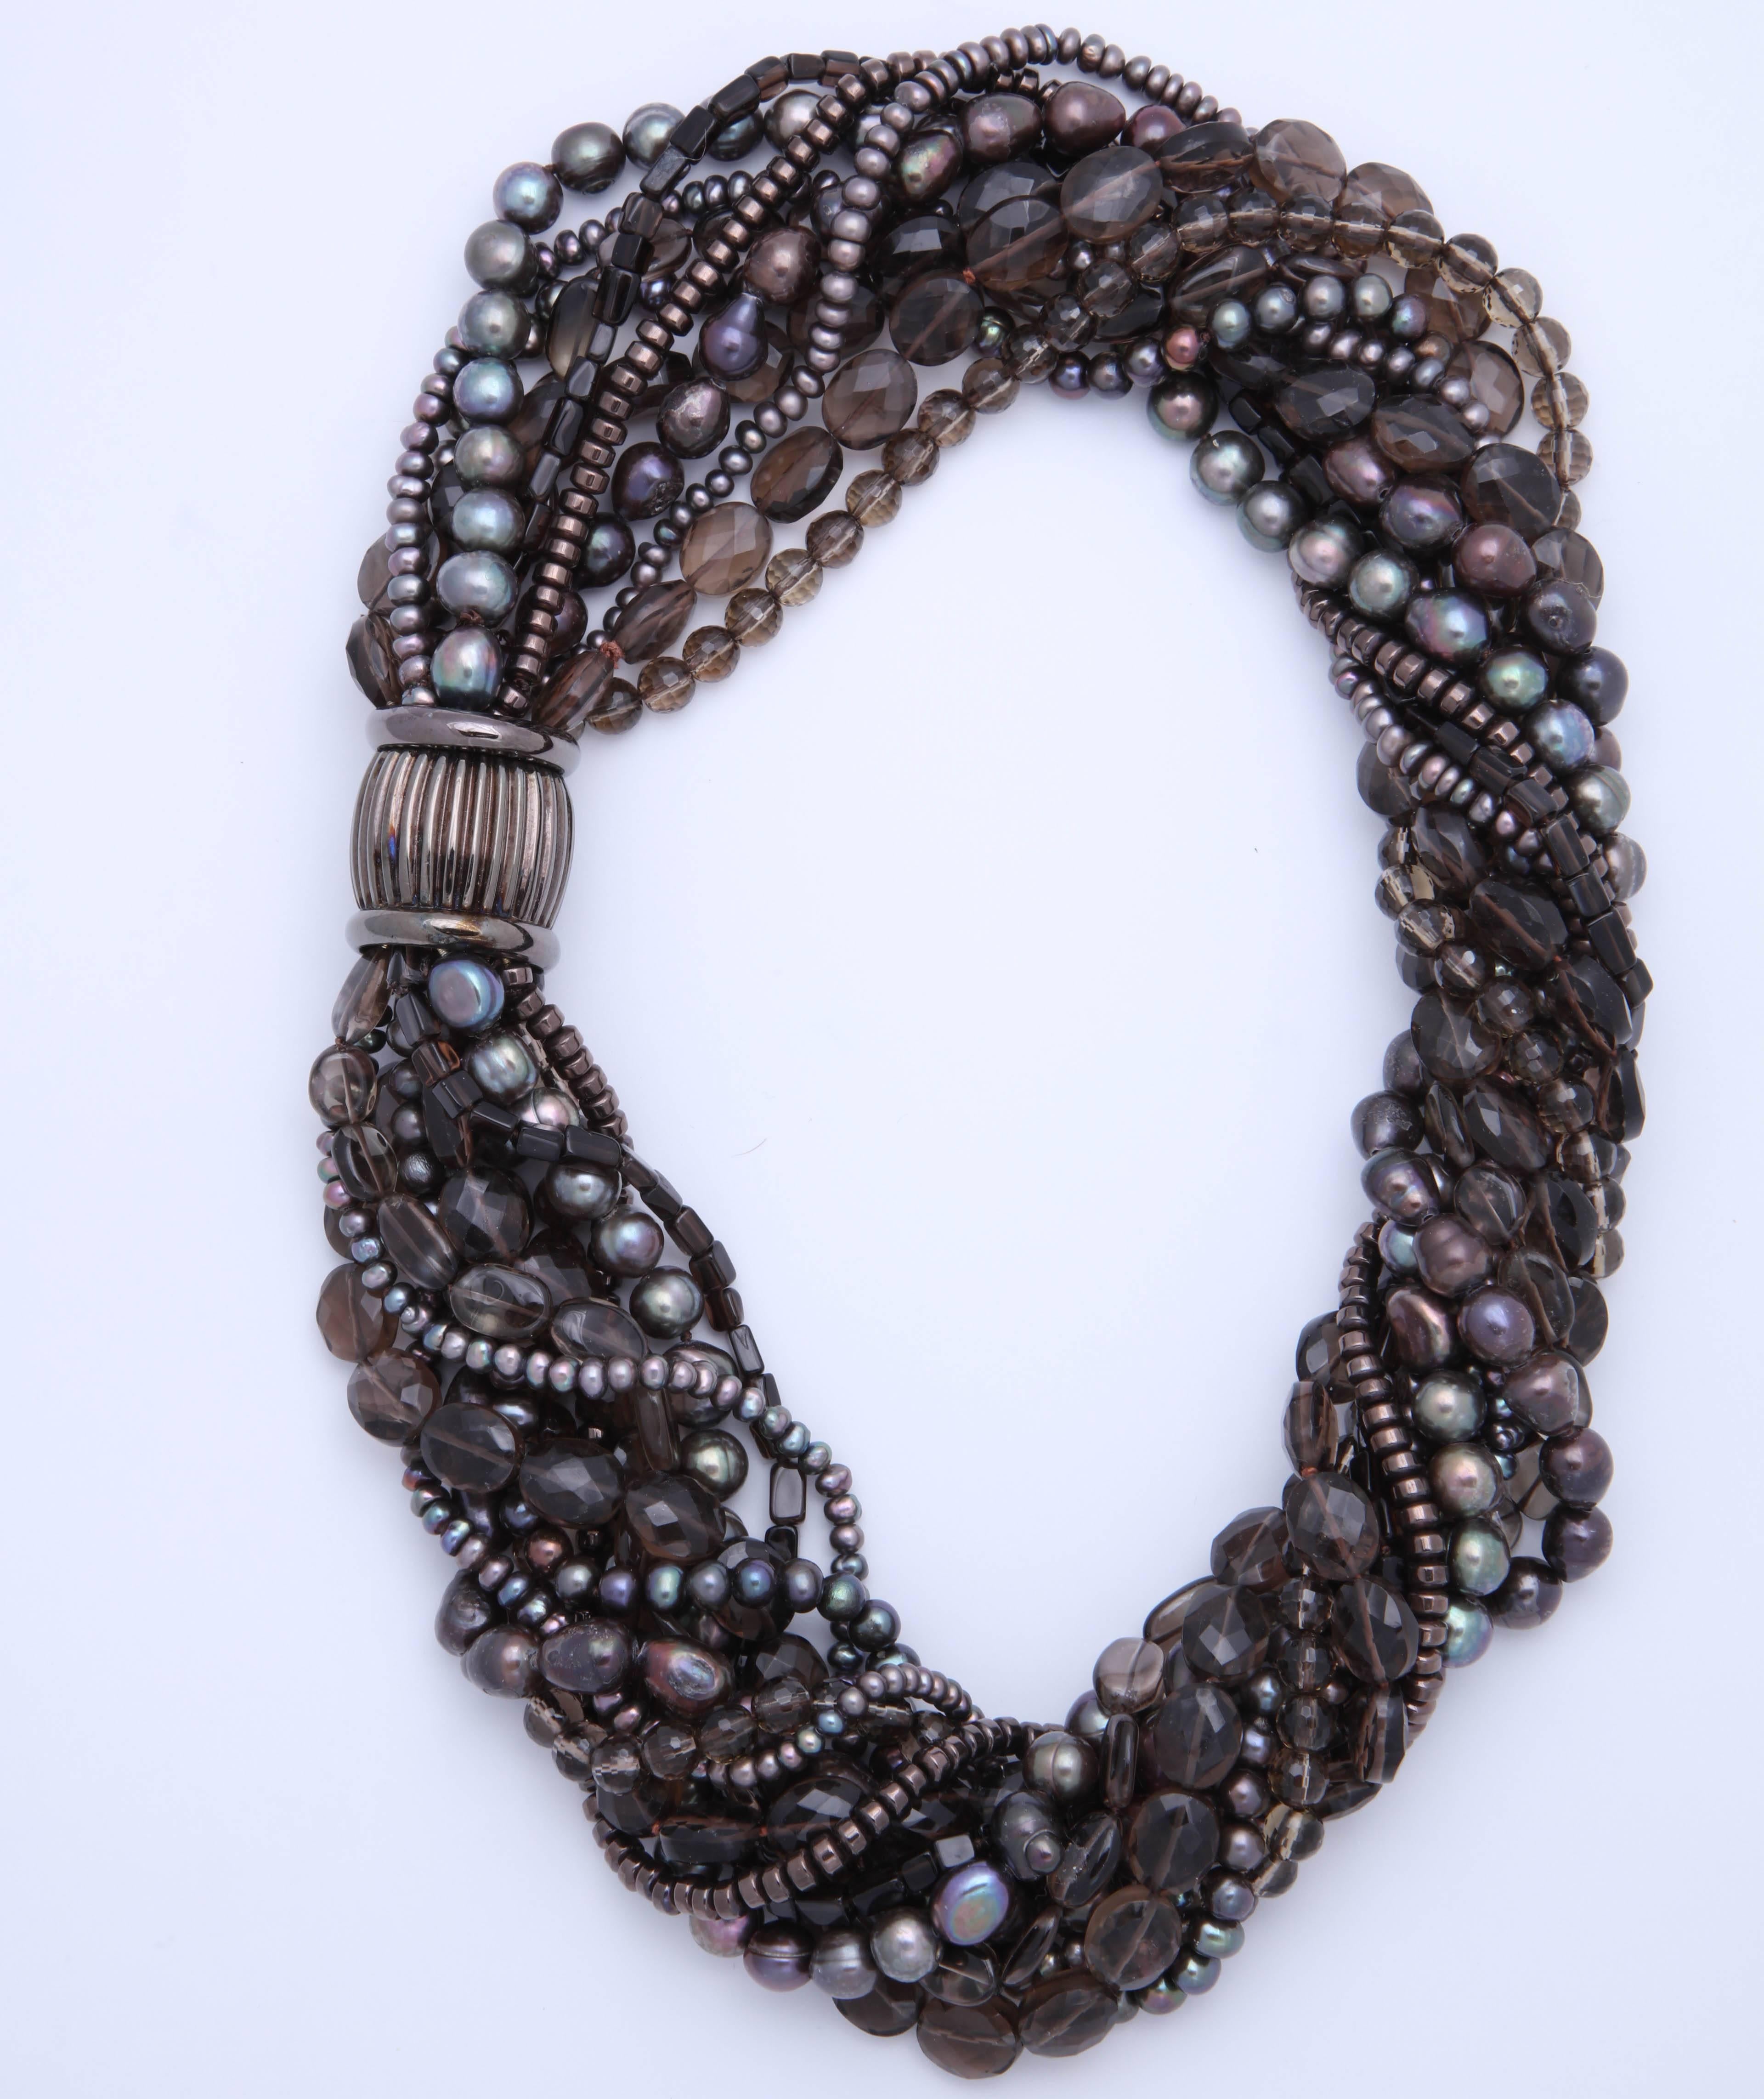 This spectacular necklace is 21 in. untwisted and 20 in. twisted, thus the name 'torsade.'
It consists of a total of 11 strands of smoky quartz, faceted and smooth,  brown fresh water pearls of different sizes and hematite rondells. The clasp is